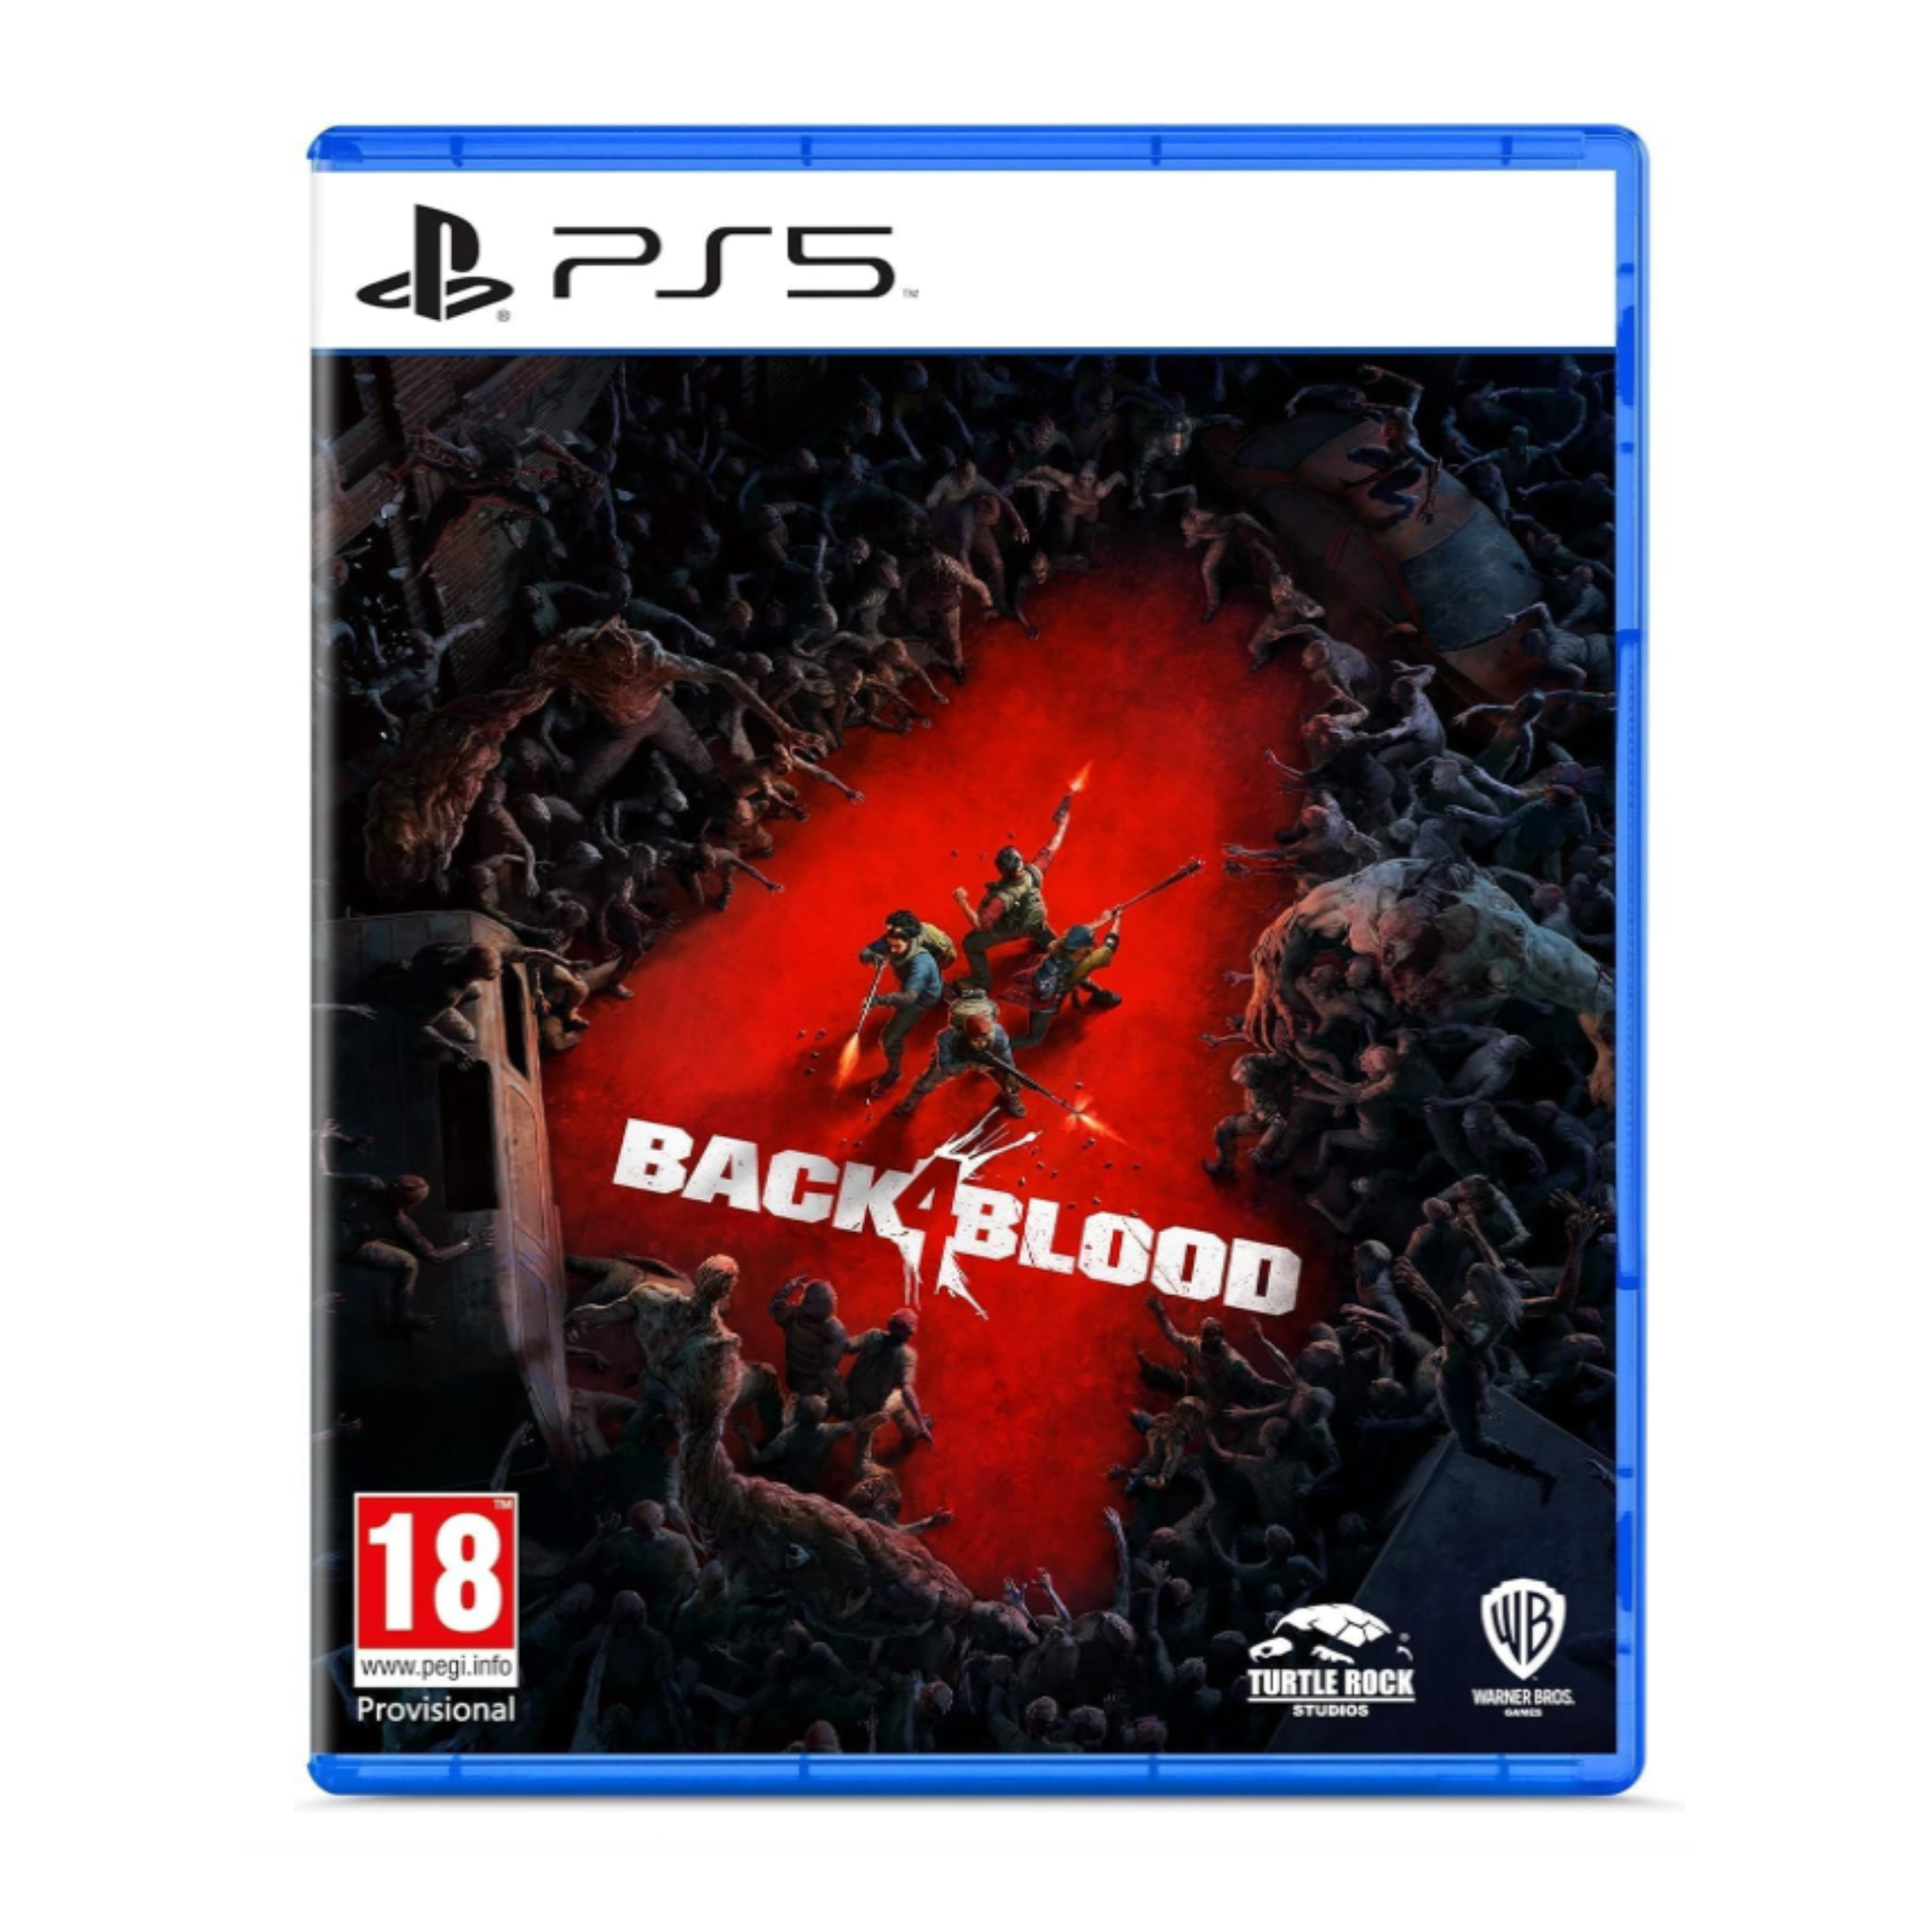 Photos - Game WZRDTECH Back 4 Blood Video  for Playstation 5